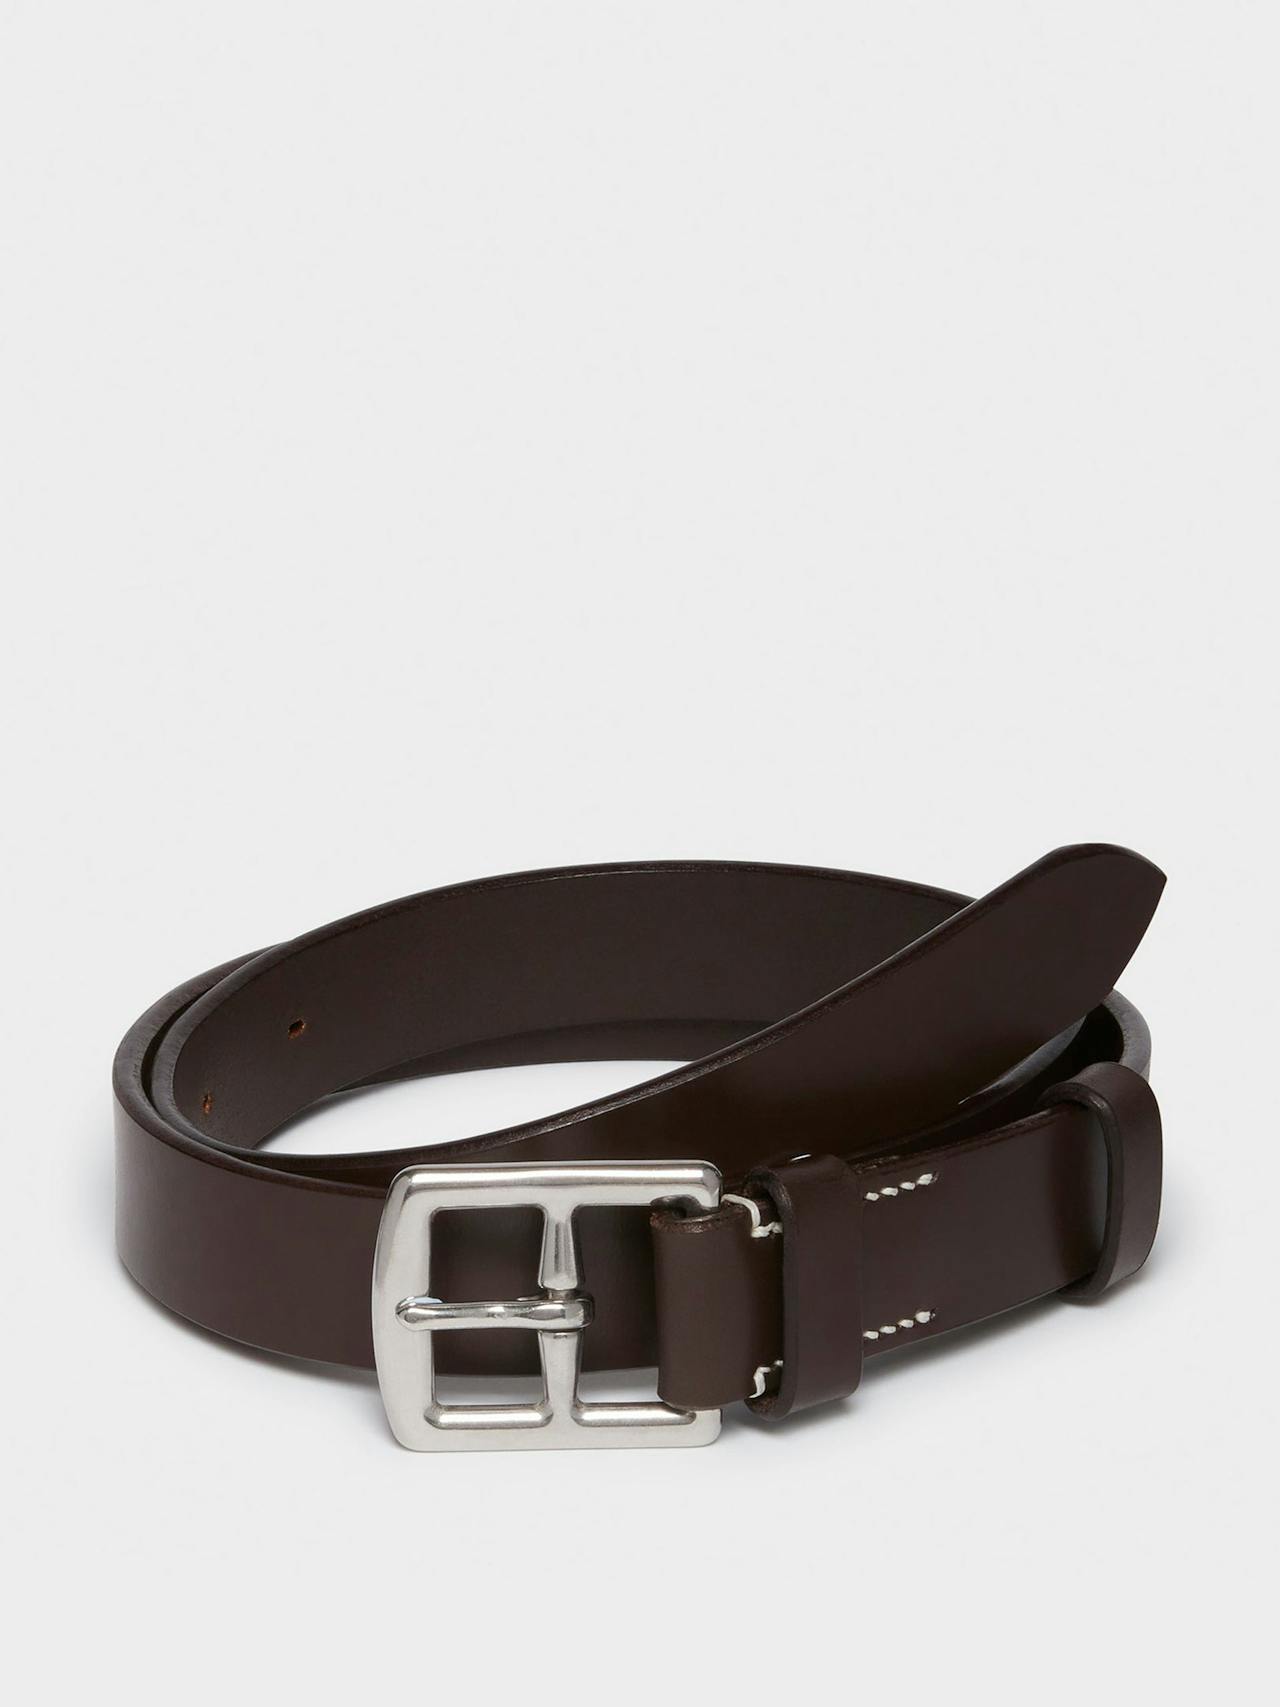 Harness buckle belt, brown and silver